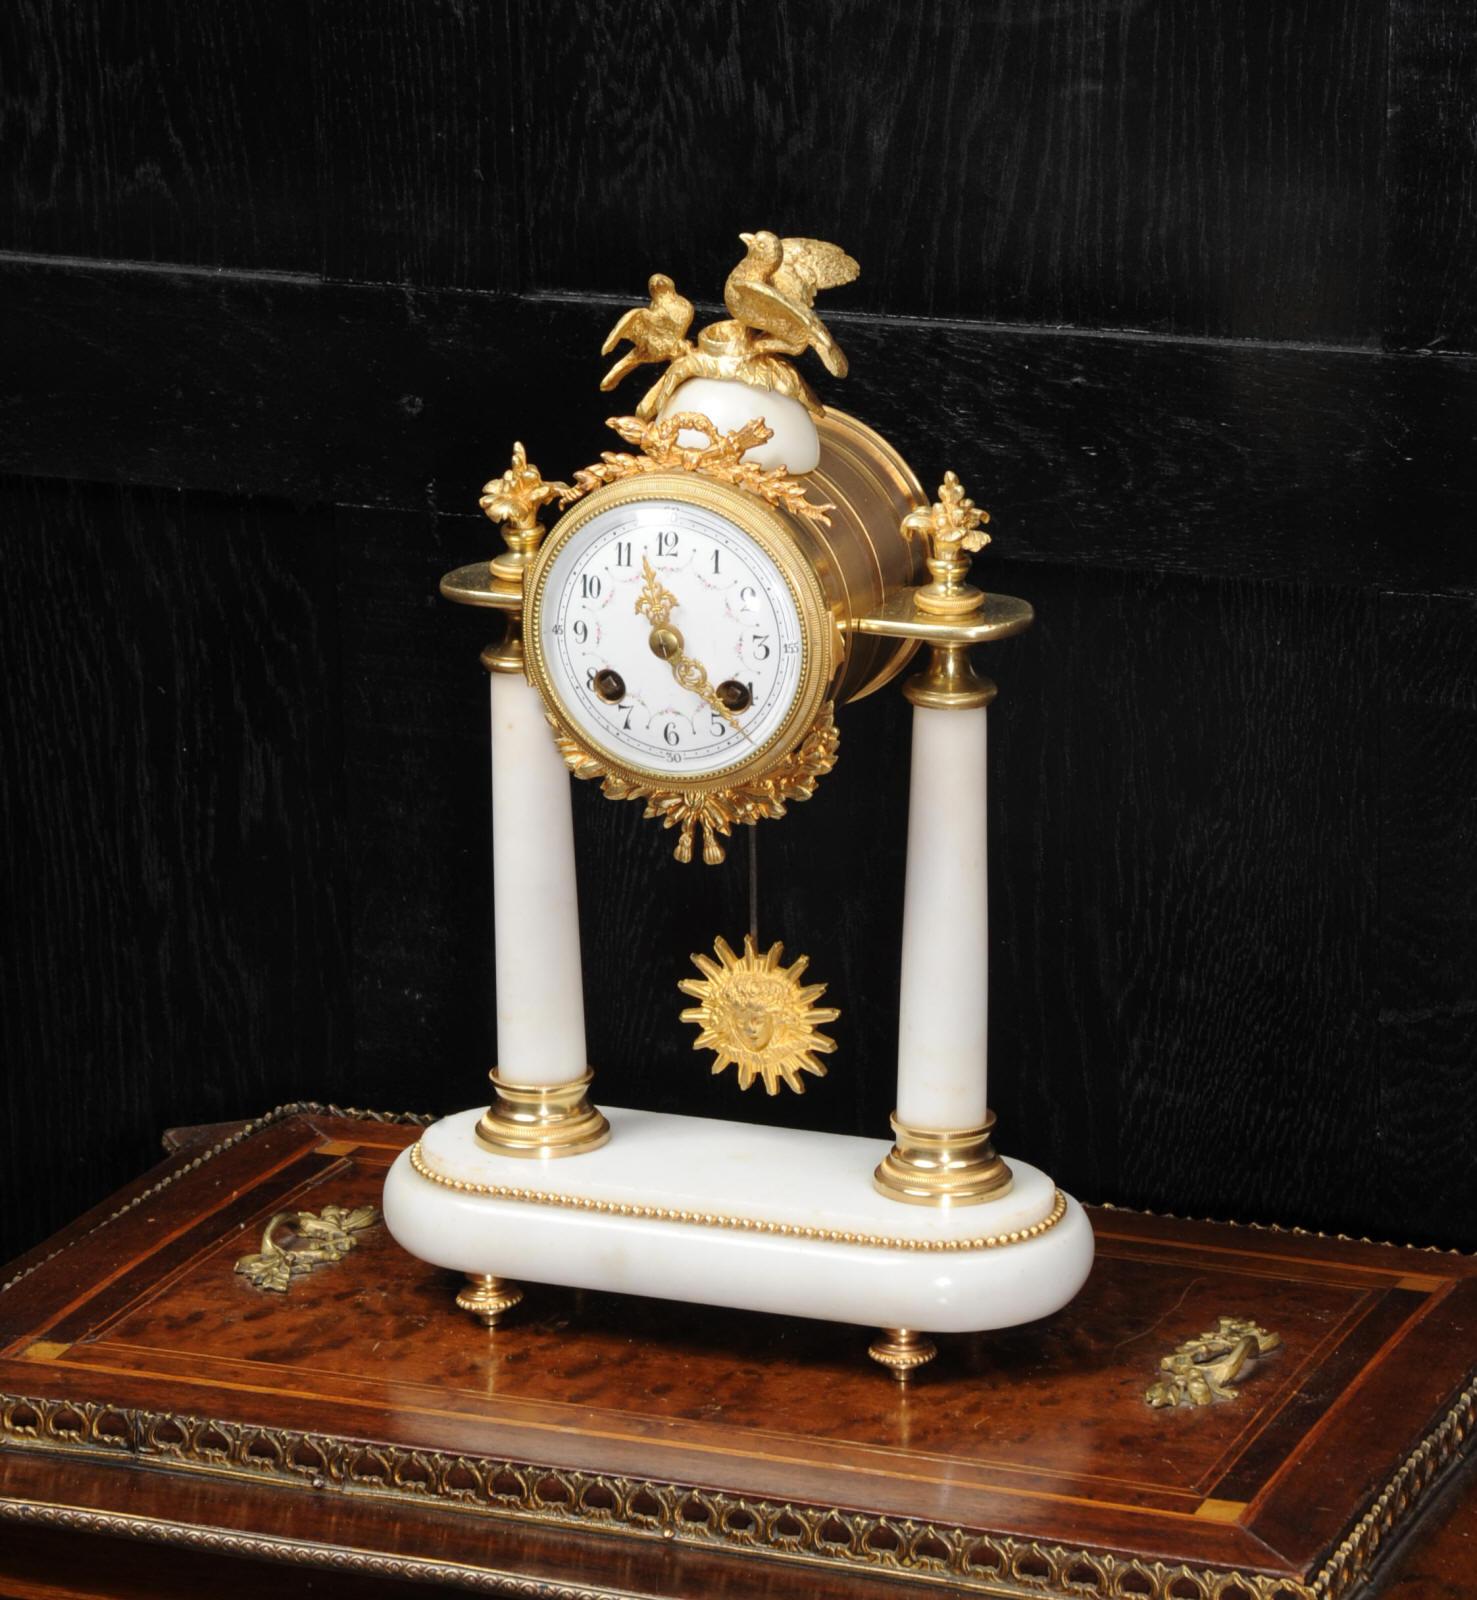 A beautiful original antique French portico clock of white marble mounted with ormolu (finely gilded bronze). The movement is held aloft on two marble pillars with the ormolu pendulum swinging gently below. Above is a pair of nesting birds,